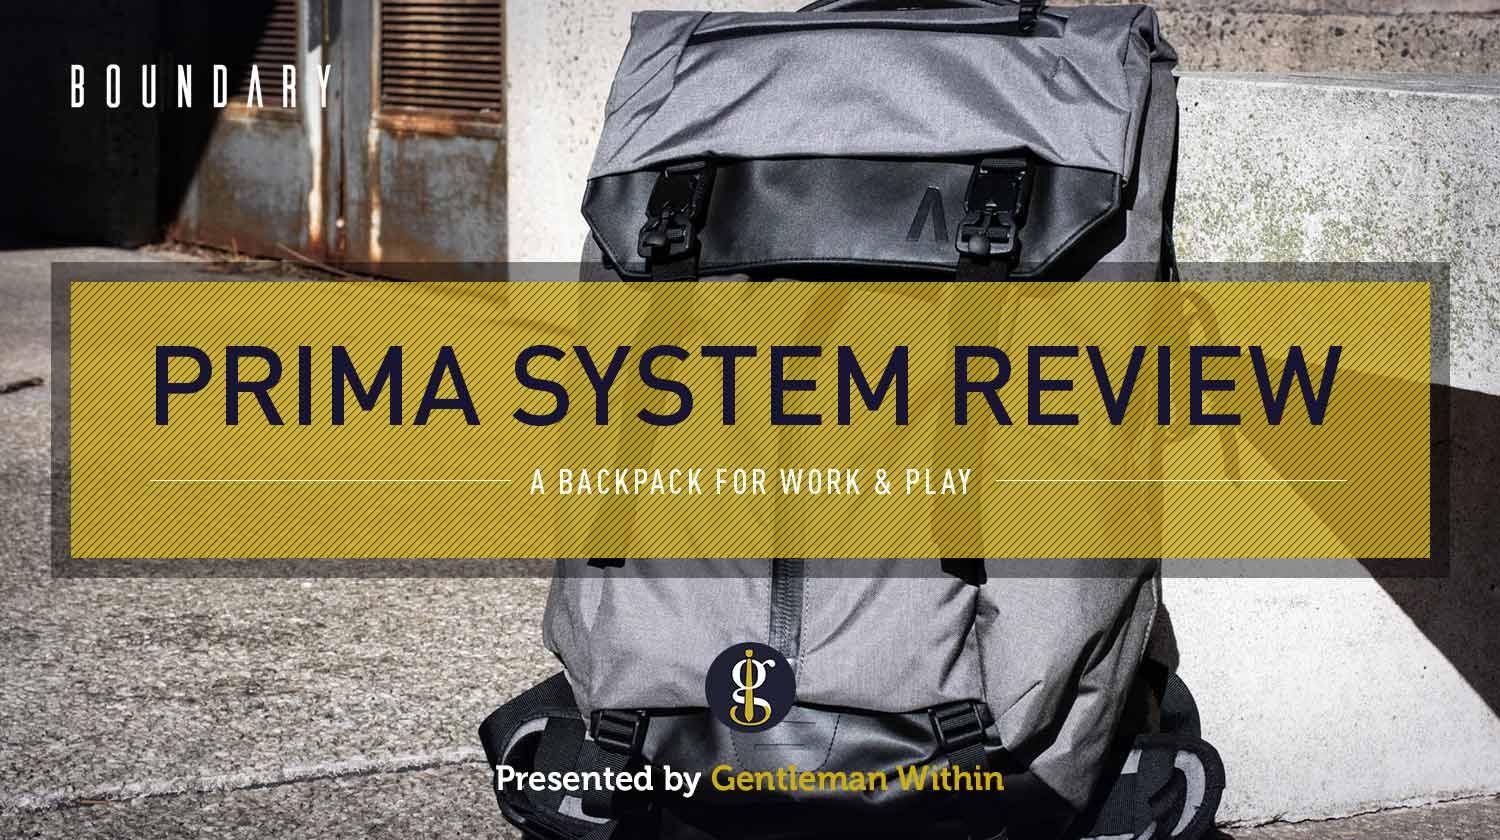 Boundary Supply Prima System Review (A Backpack for Work & Play) | GENTLEMAN WITHIN